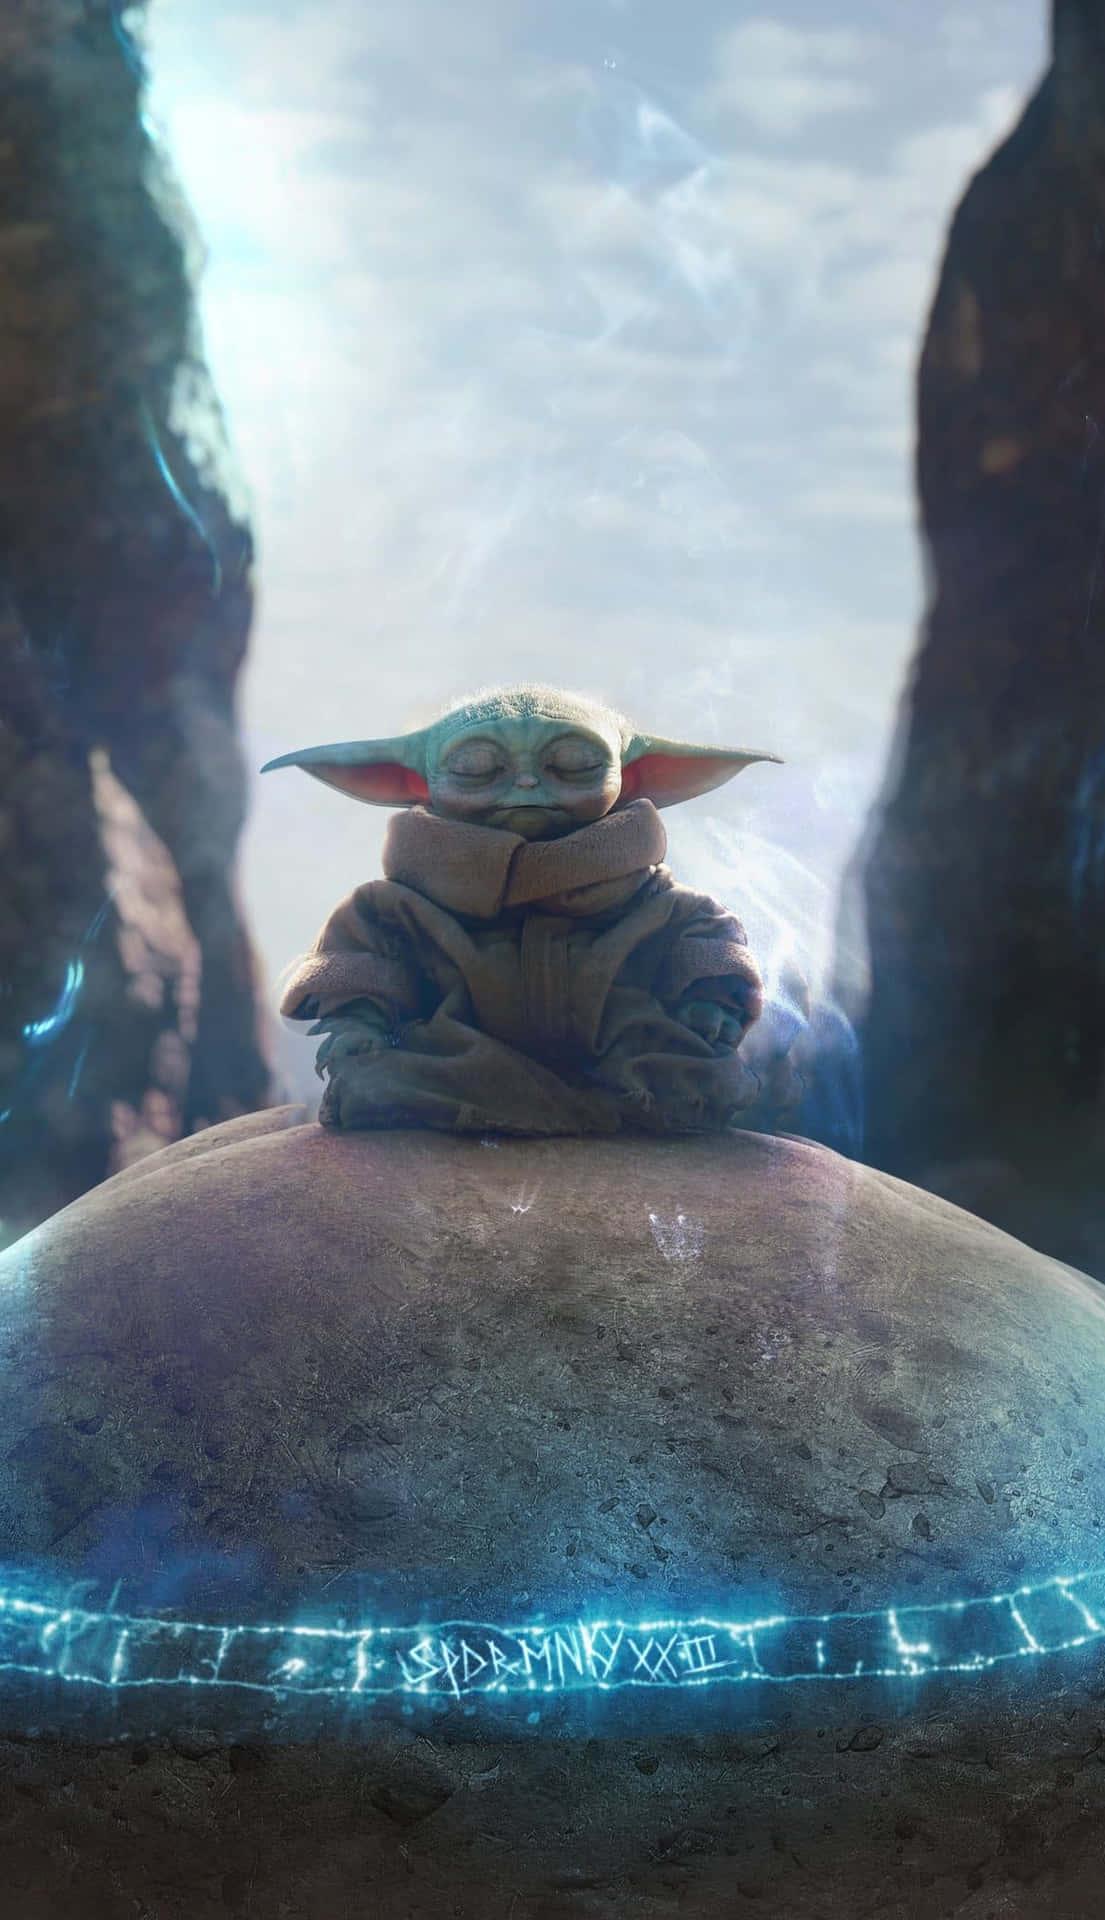 Get your hands on this Baby Yoda iPhone to join in the Force! Wallpaper